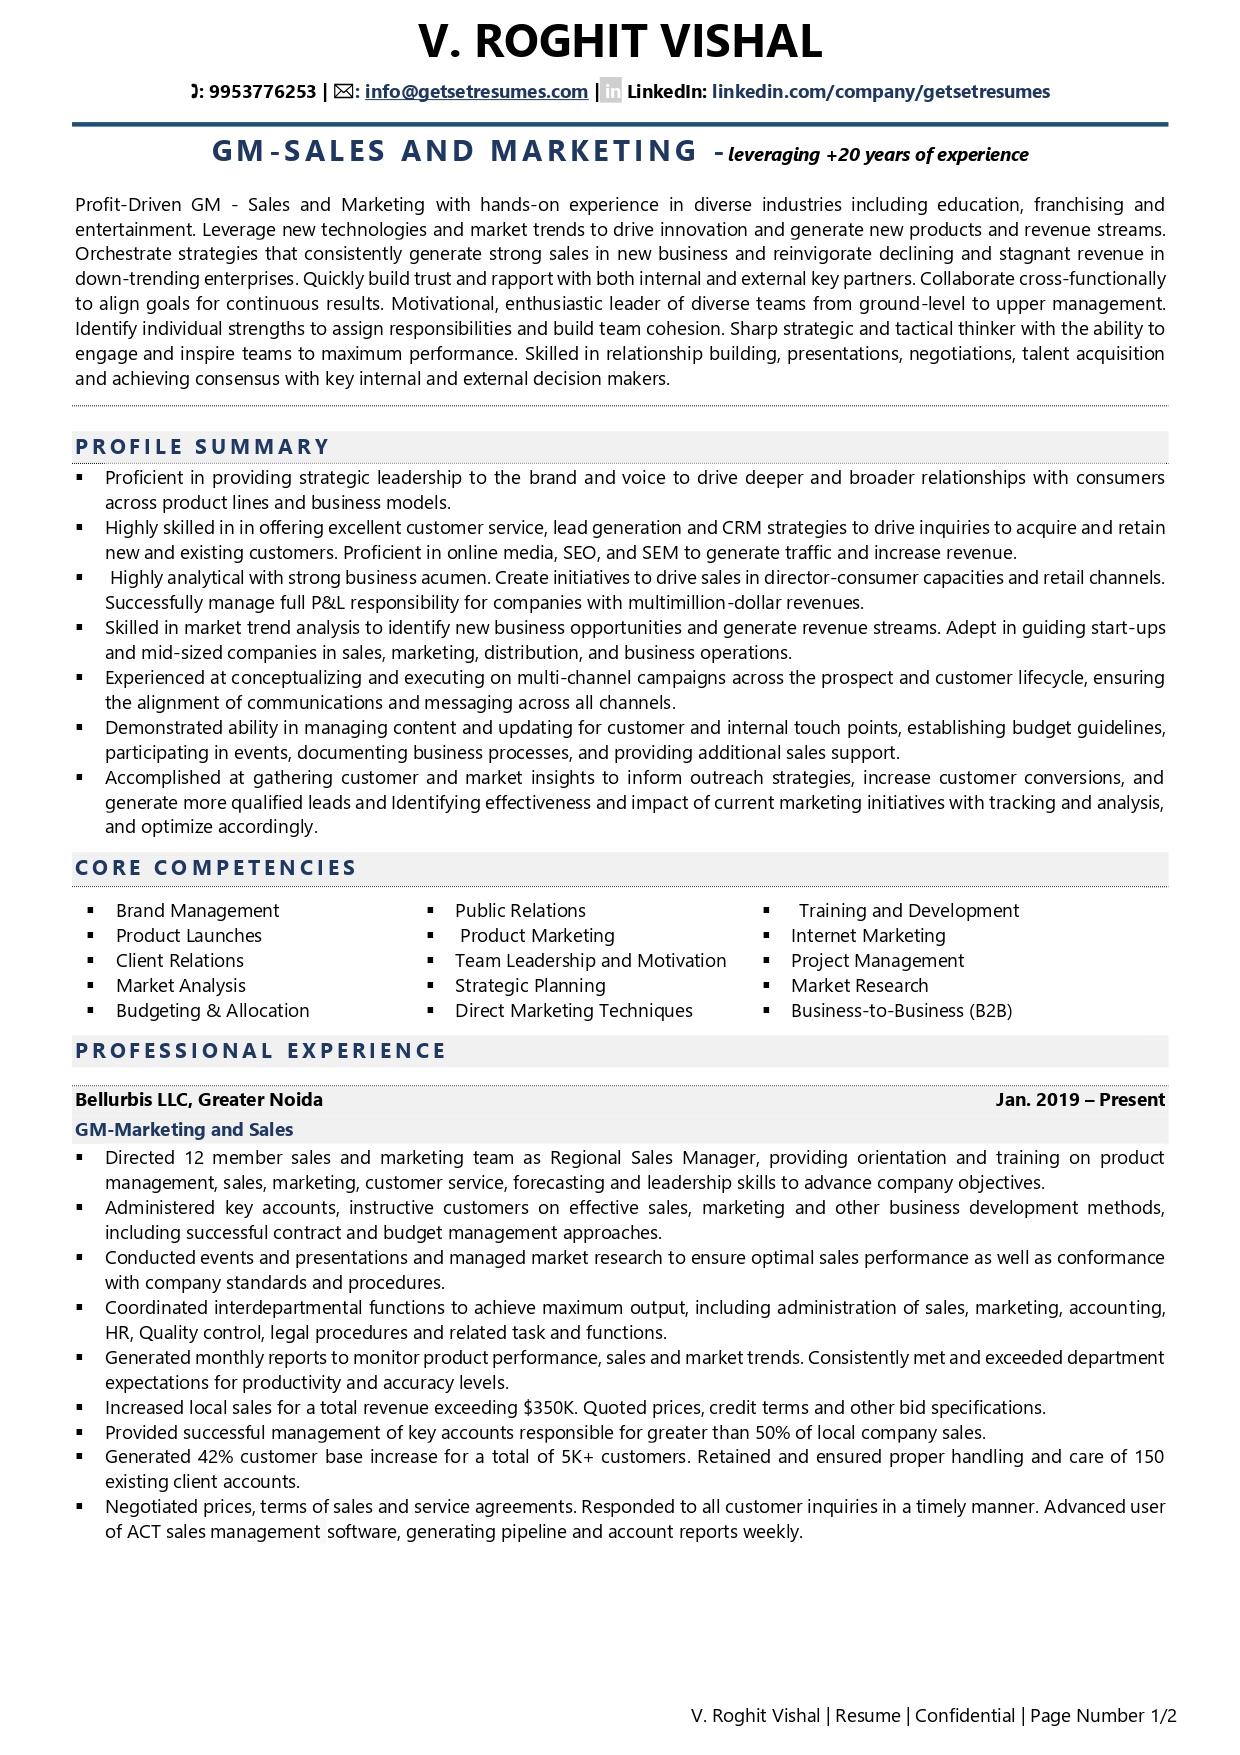 GM – Sales & Marketing - Resume Example & Template